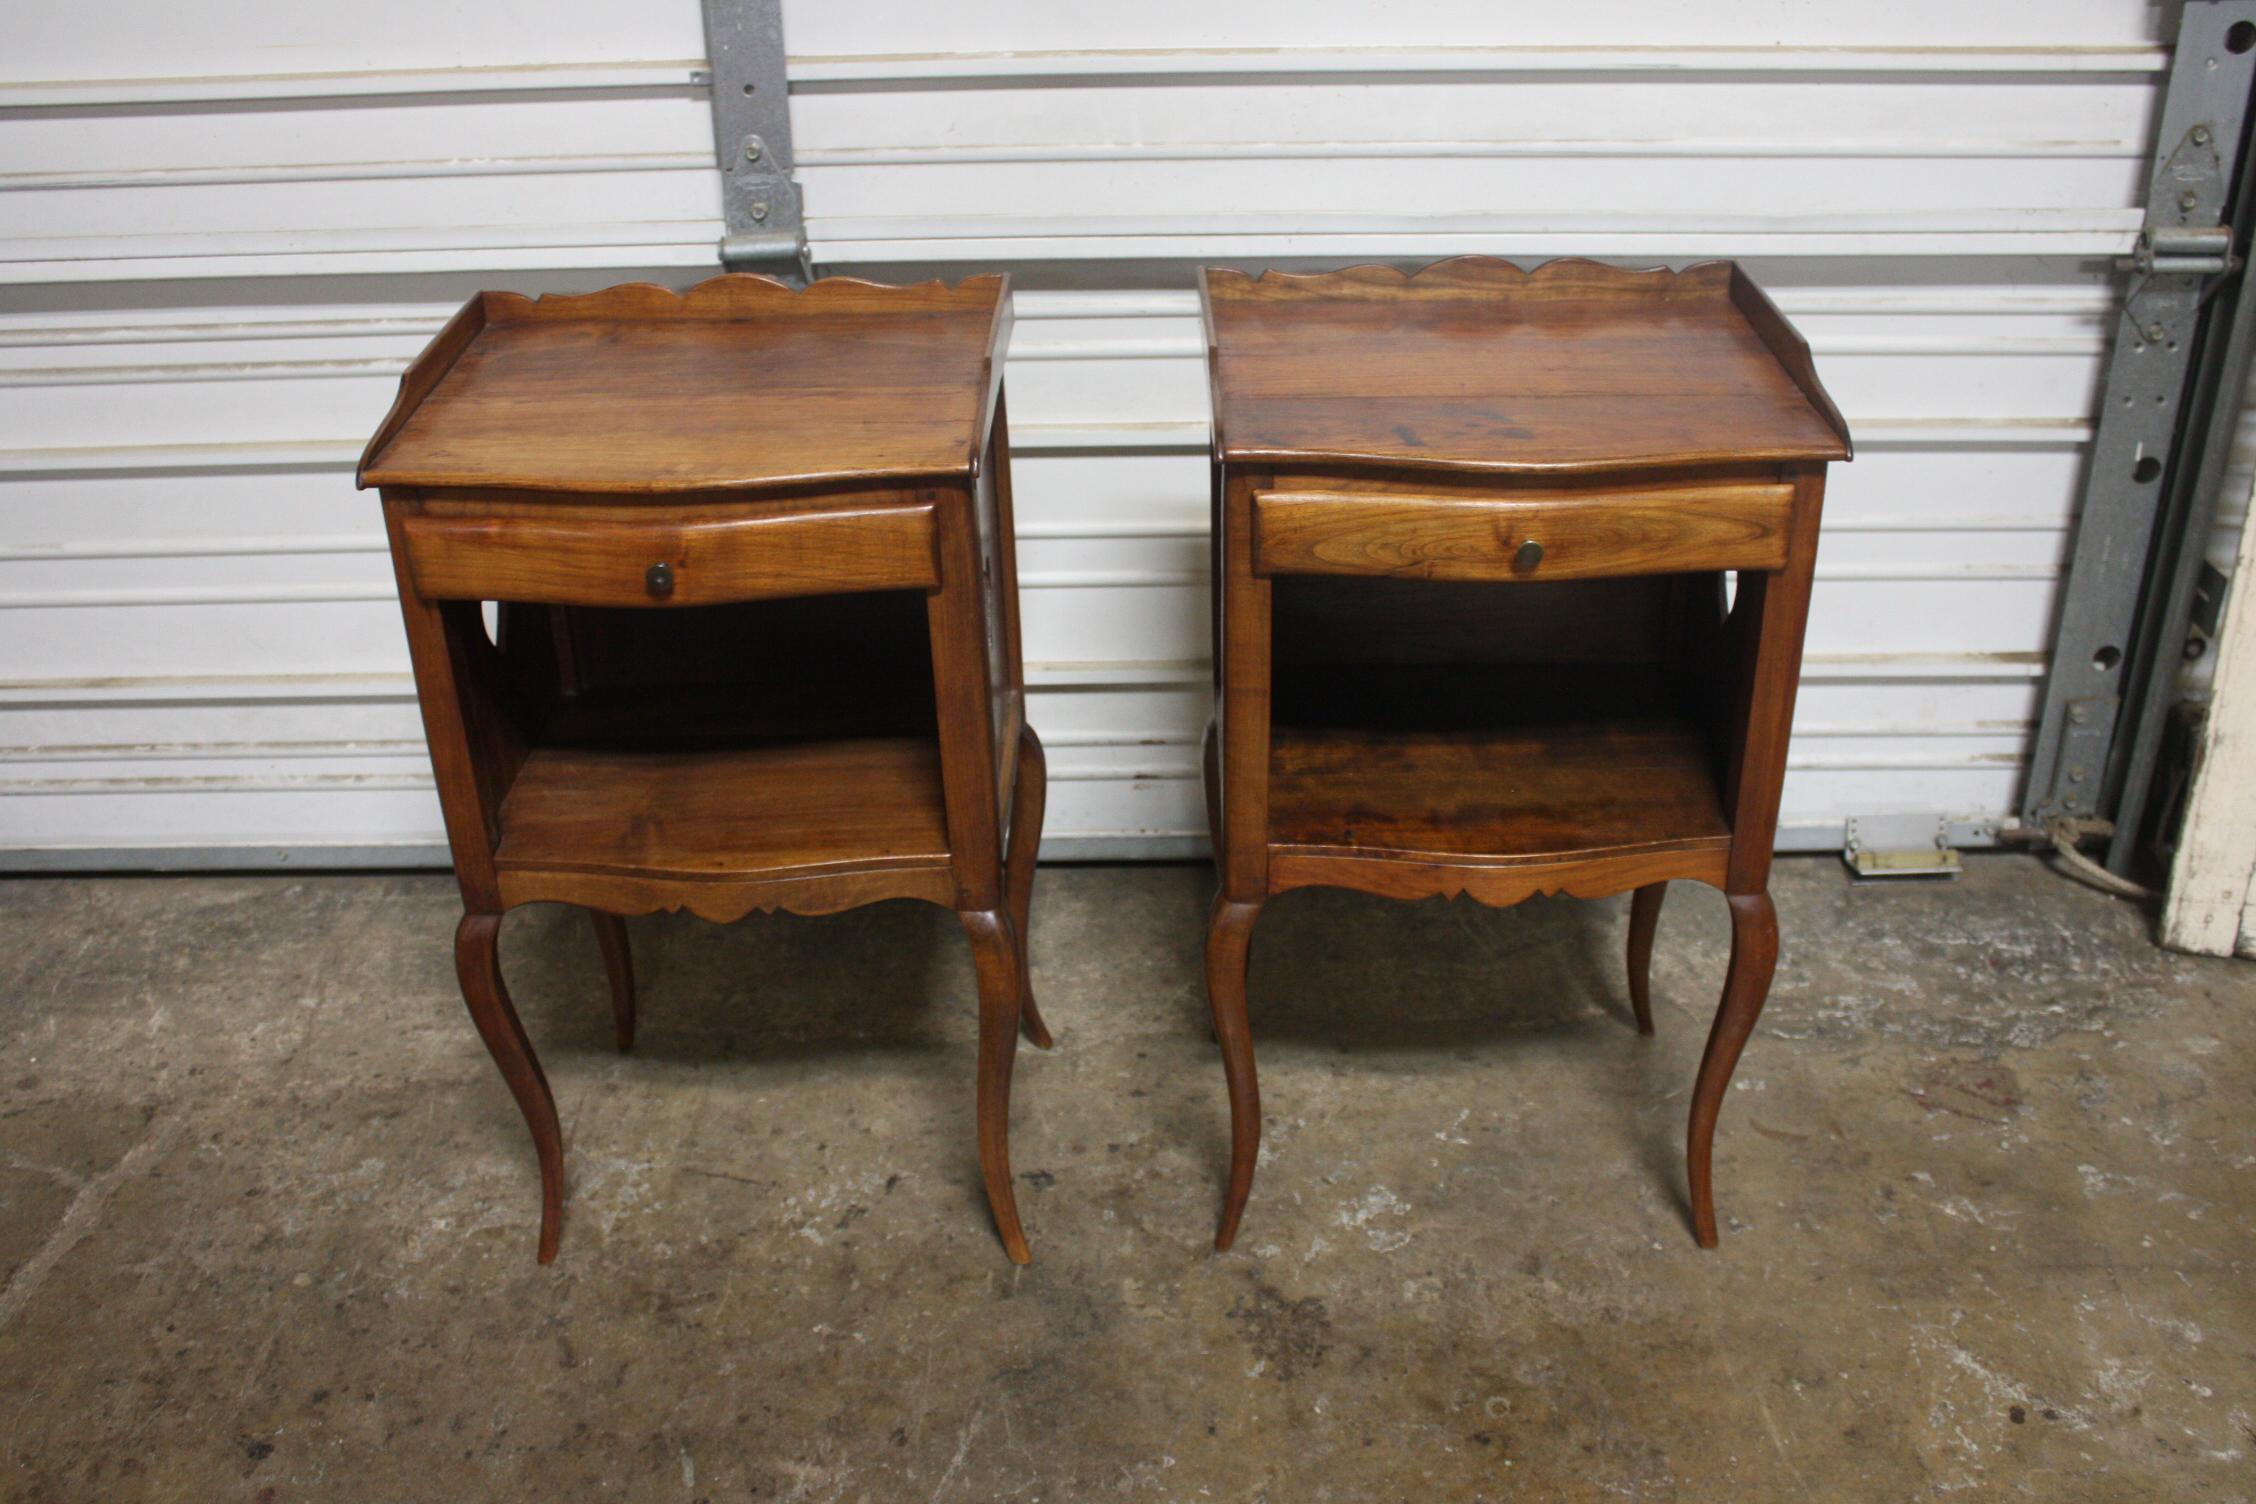 Very charming pair of night stands that can be used anywhere at home.